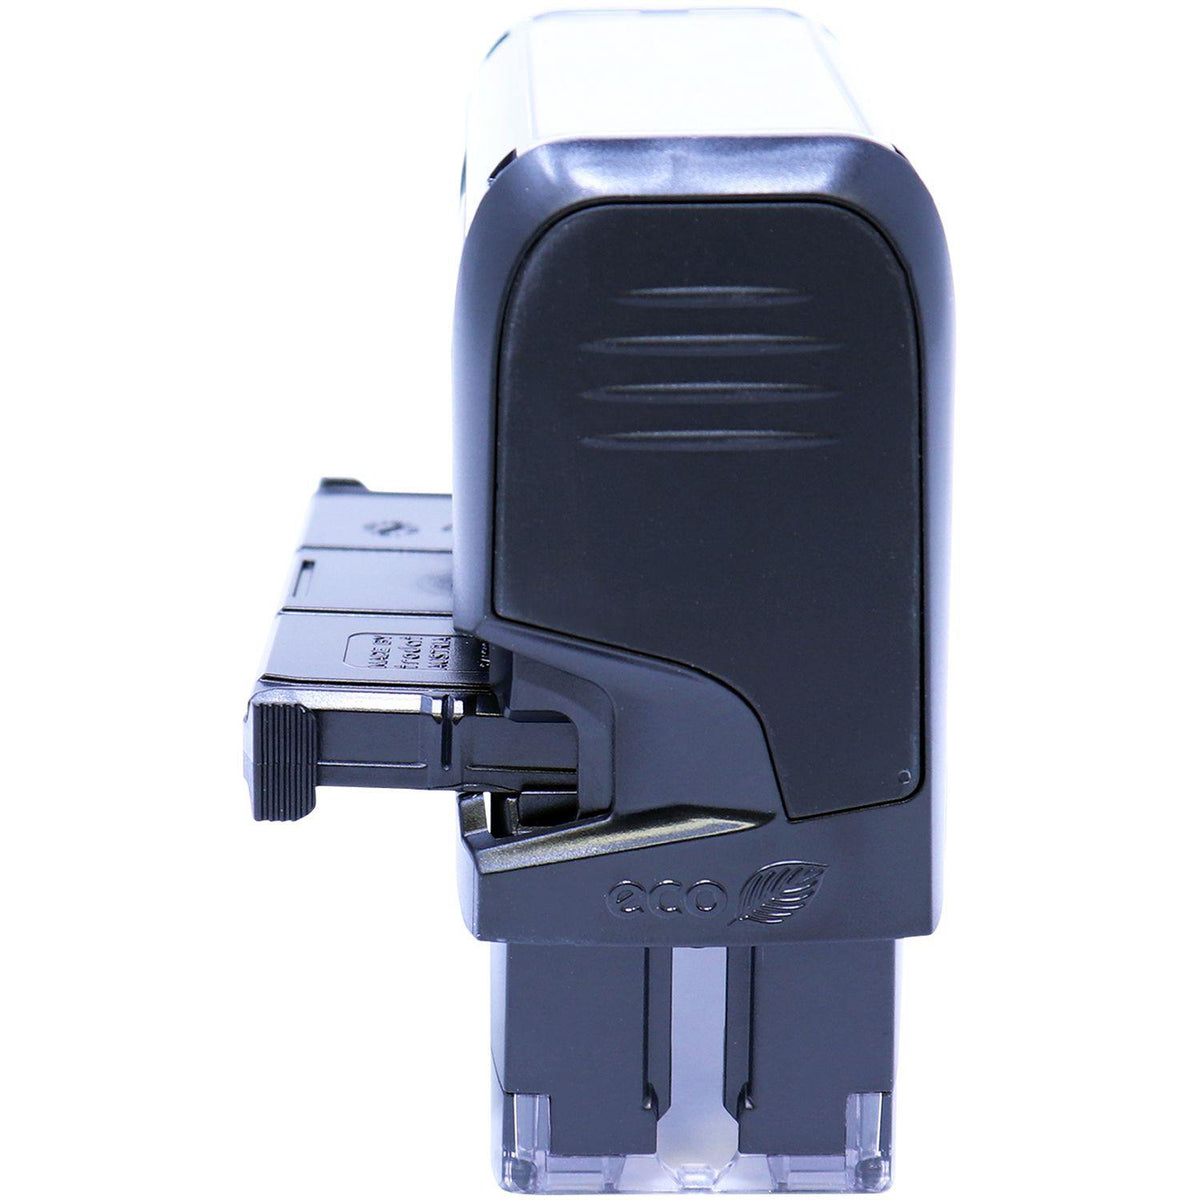 Self Inking Entered Stamp - Engineer Seal Stamps - Brand_Trodat, Impression Size_Small, Stamp Type_Self-Inking Stamp, Type of Use_Office